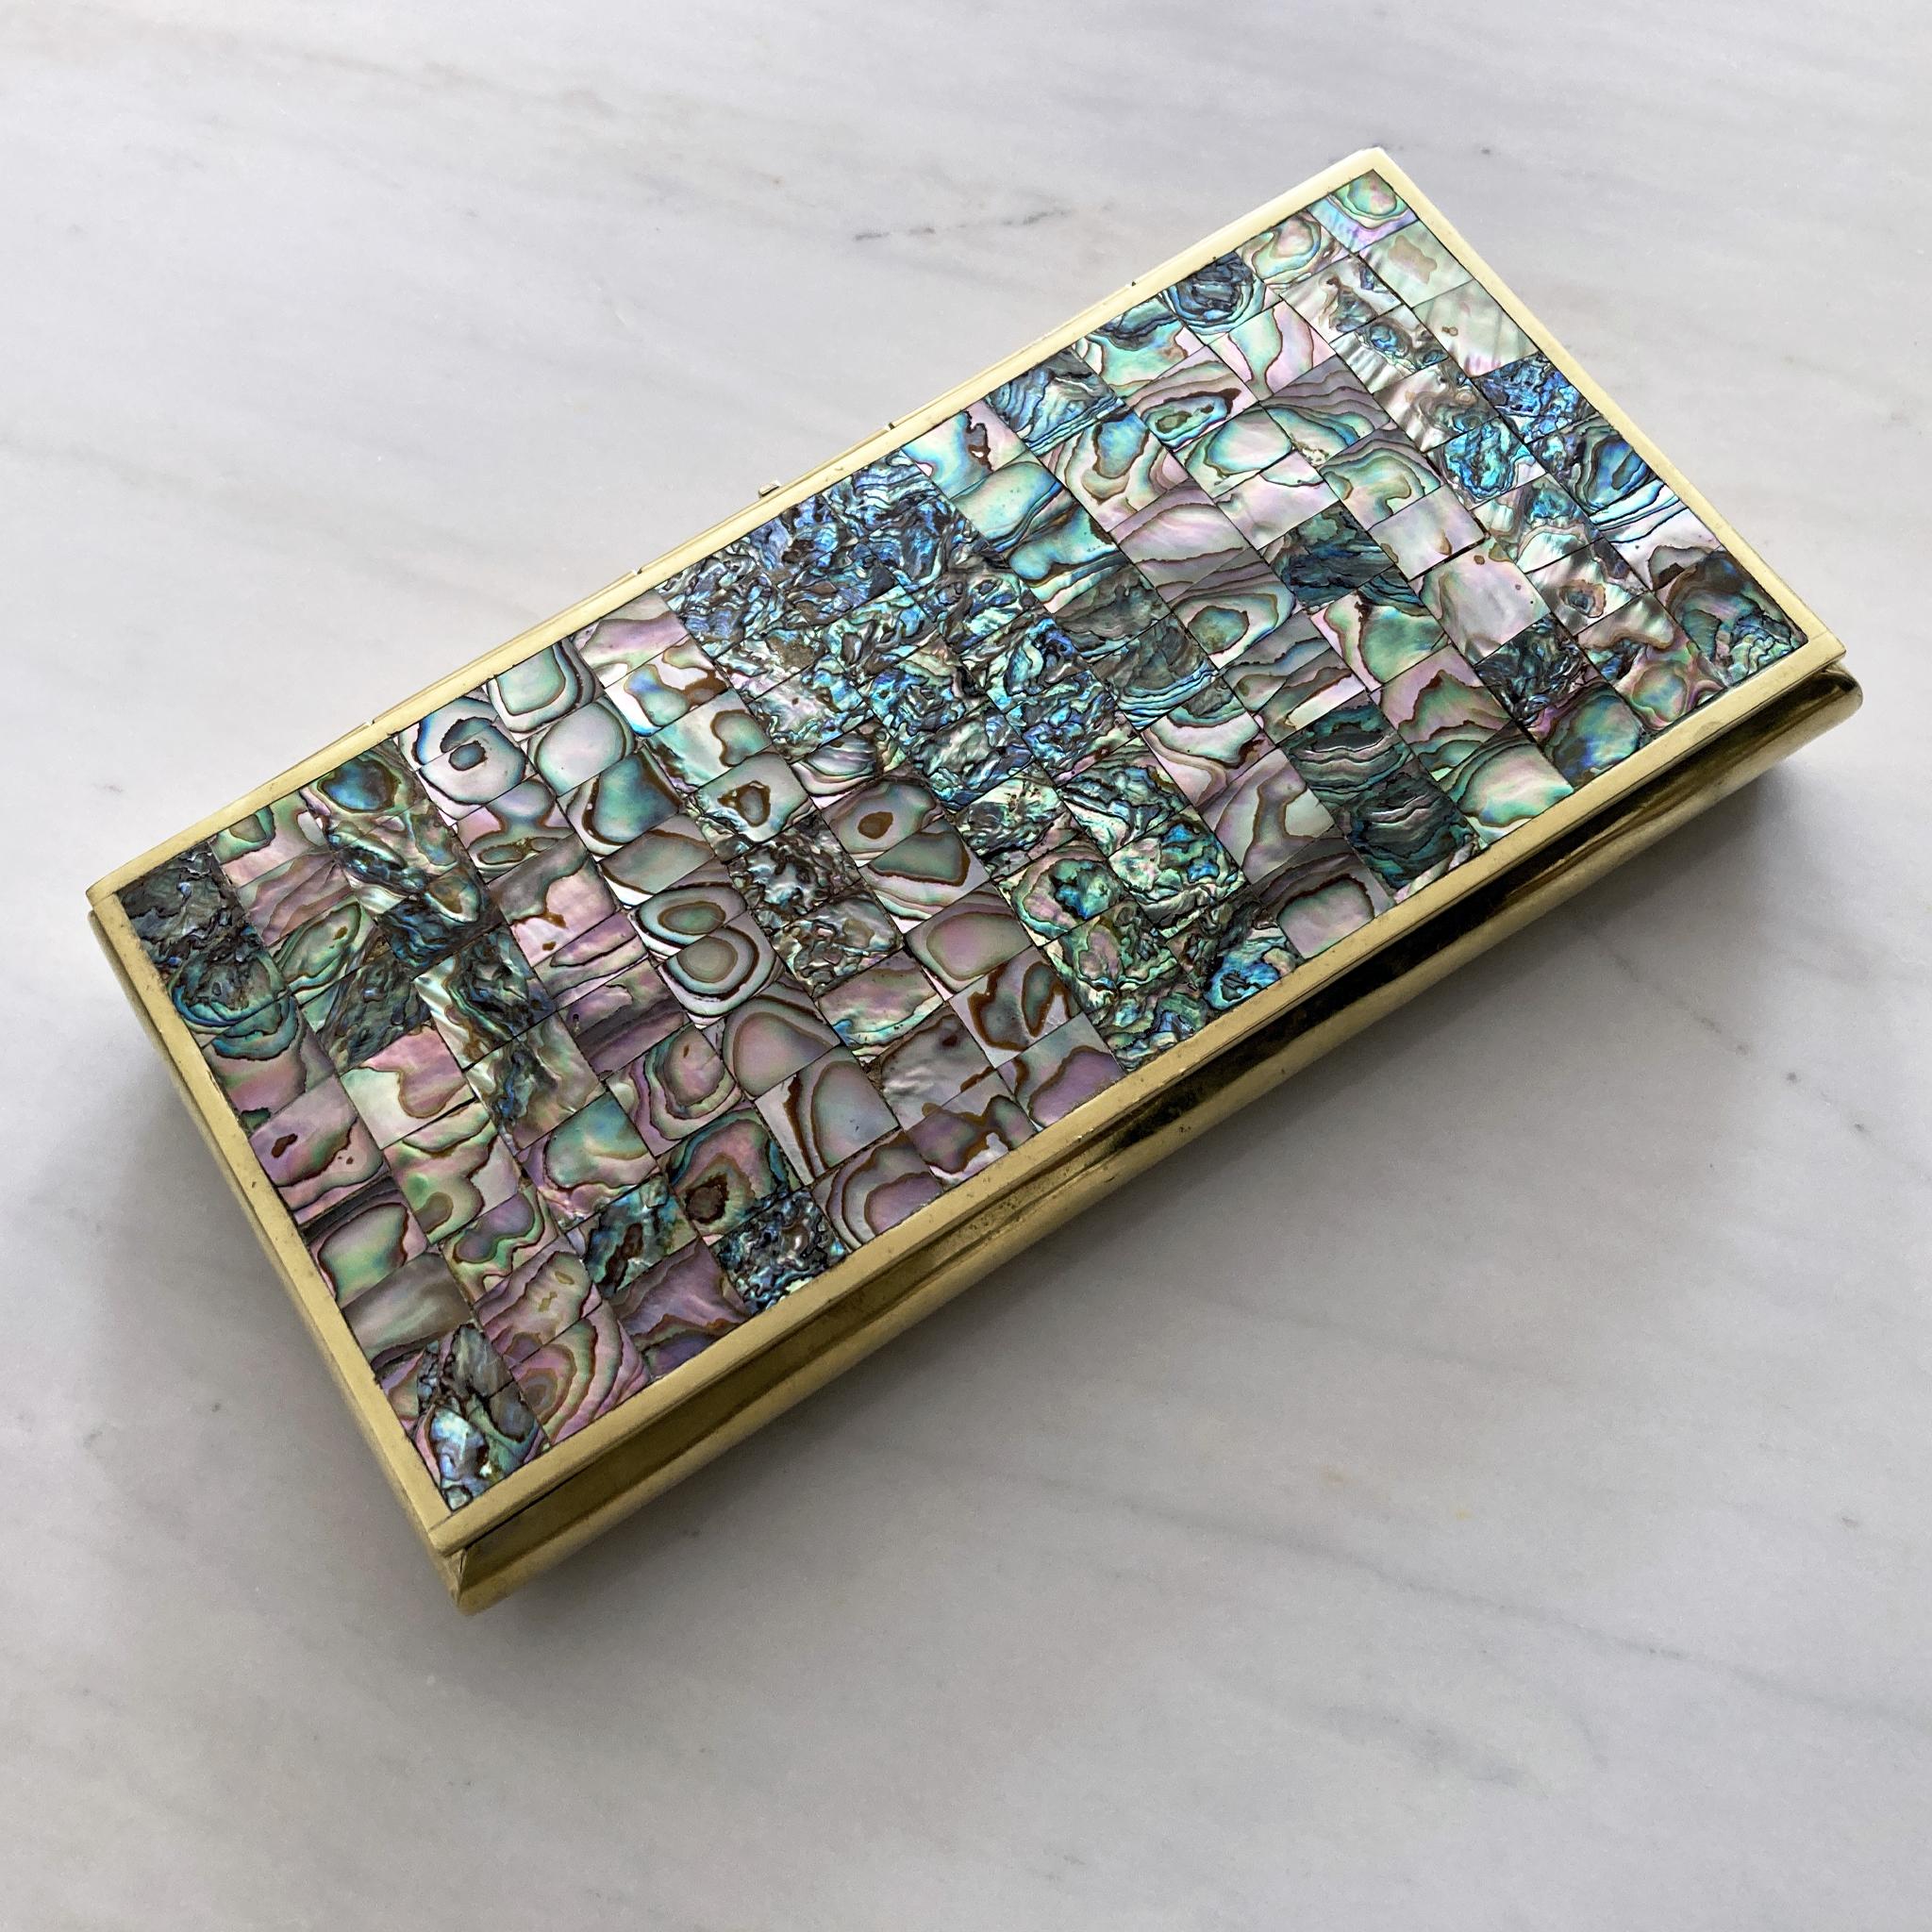 Mid-Century Modern Midcentury Hinged Abalone Shell and Brass Box, Mosaic Pattern on Lid, Wood-lined For Sale